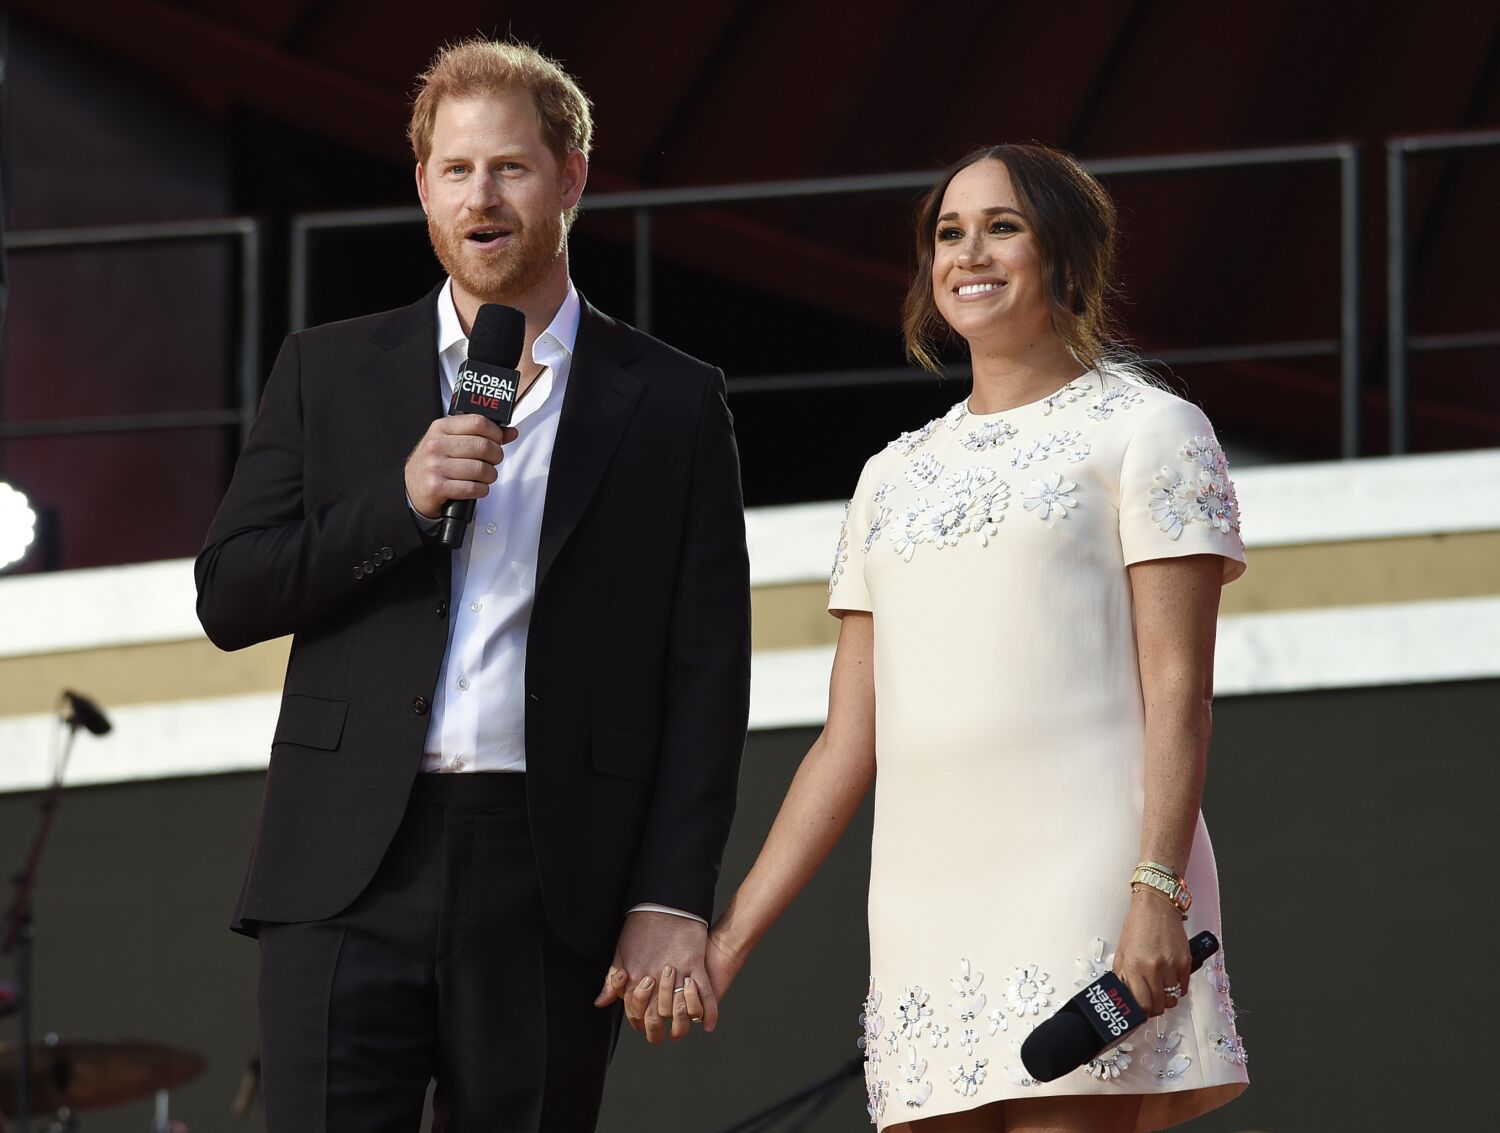 Prince Harry and Meghan Markle cut ties with Spotify. So why are they facing backlash?